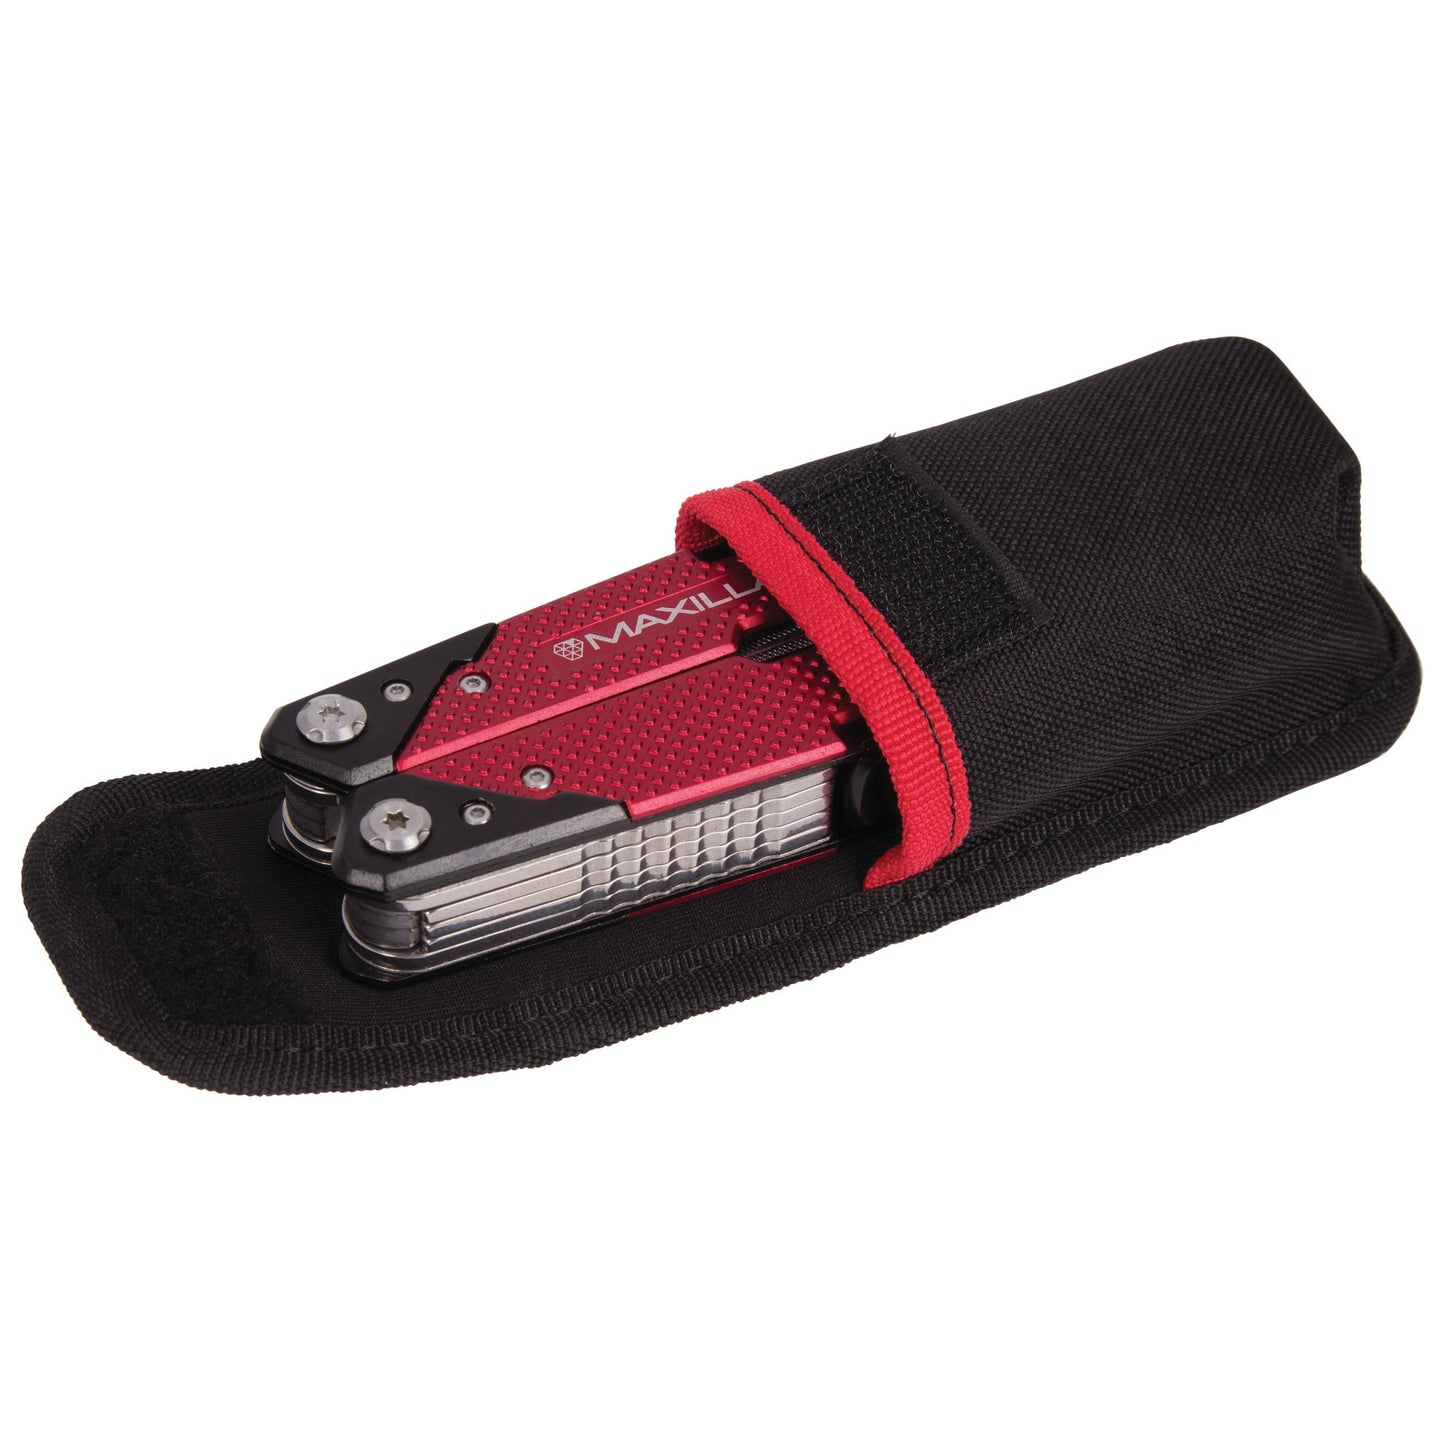 14-in-1 Multi-Tool with EZ Push Tool Lock and Nylon Holster